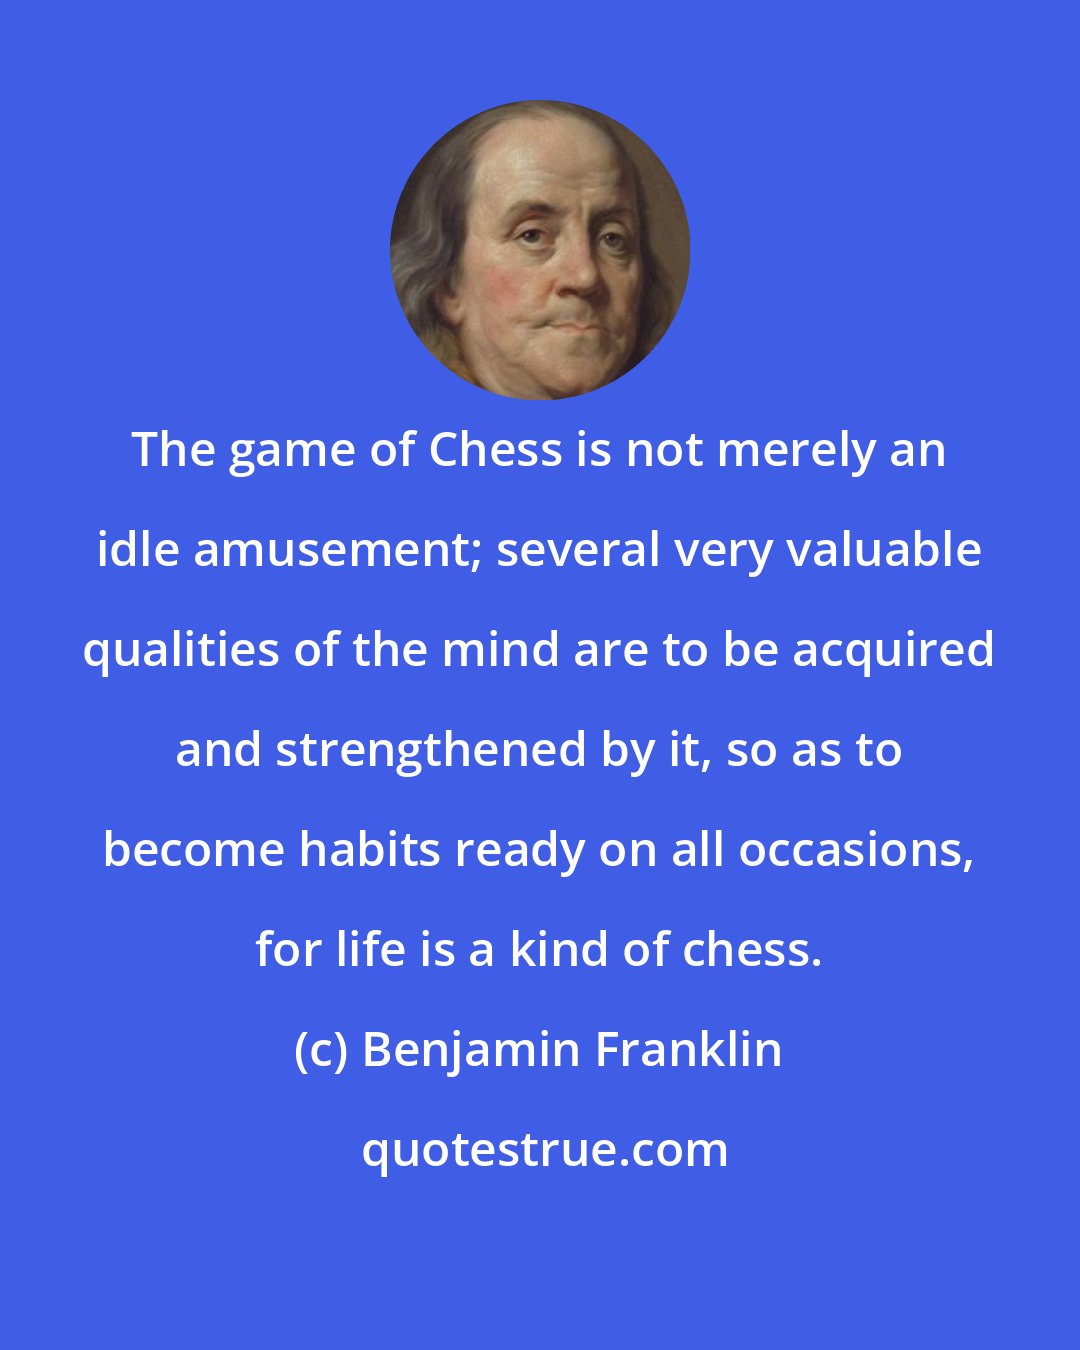 Benjamin Franklin: The game of Chess is not merely an idle amusement; several very valuable qualities of the mind are to be acquired and strengthened by it, so as to become habits ready on all occasions, for life is a kind of chess.